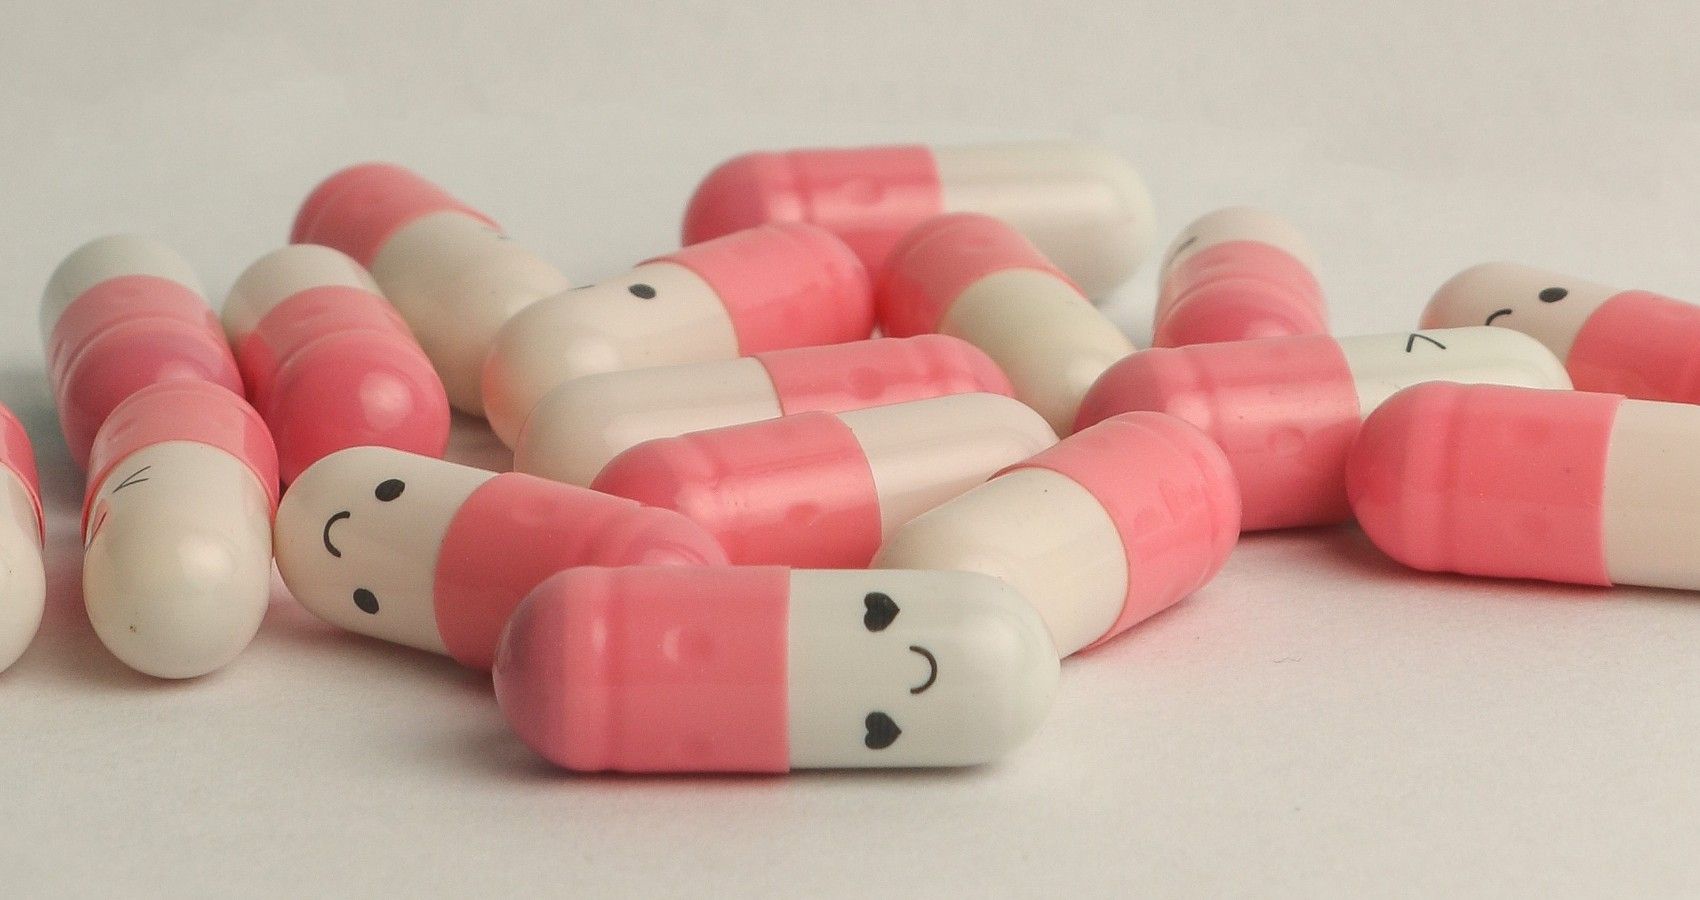 A pile of pills with small happy faces on them